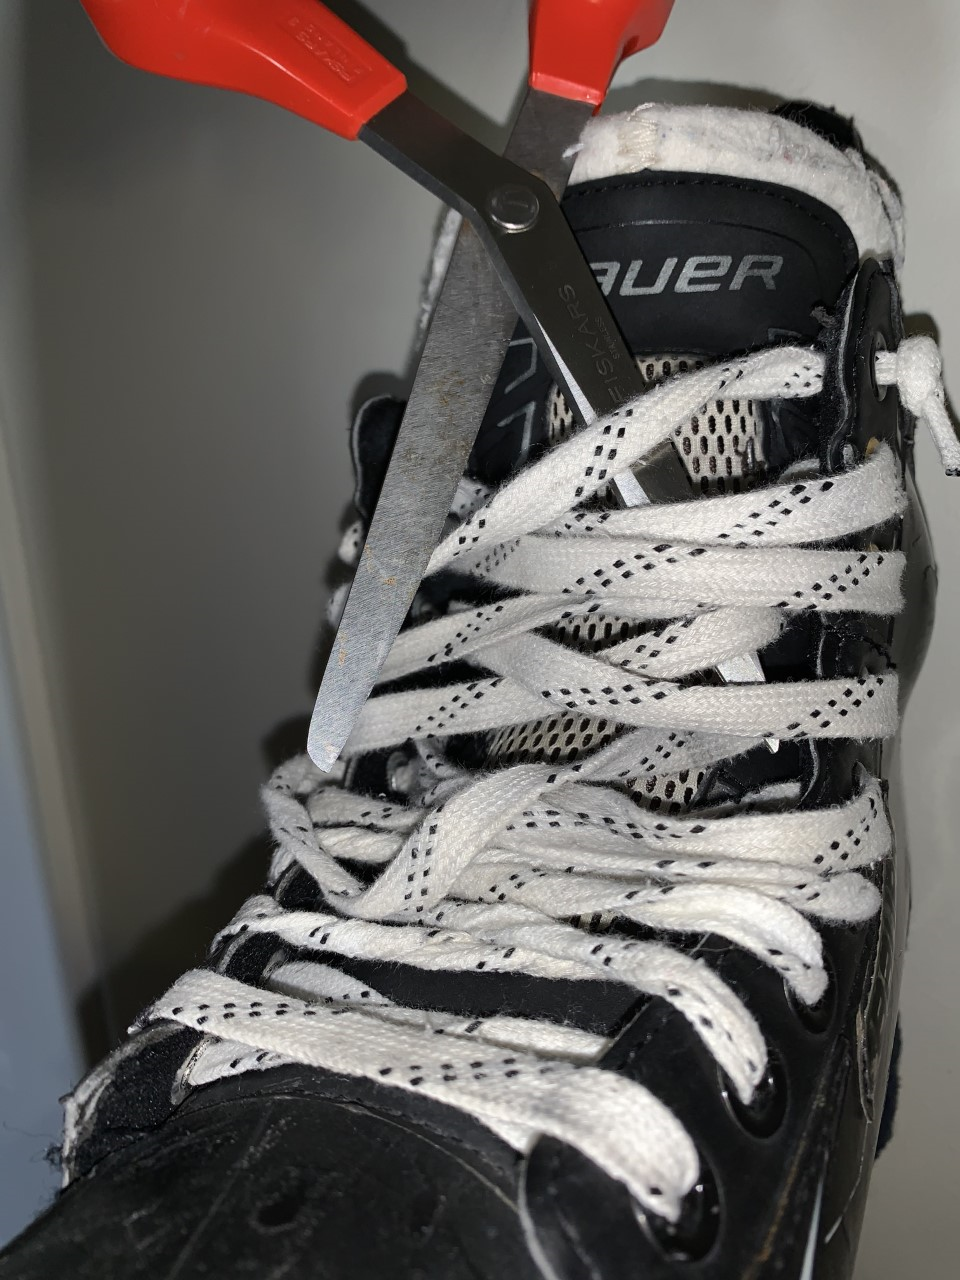 Cutting a teammate's laces is considered one of the great hockey pranks